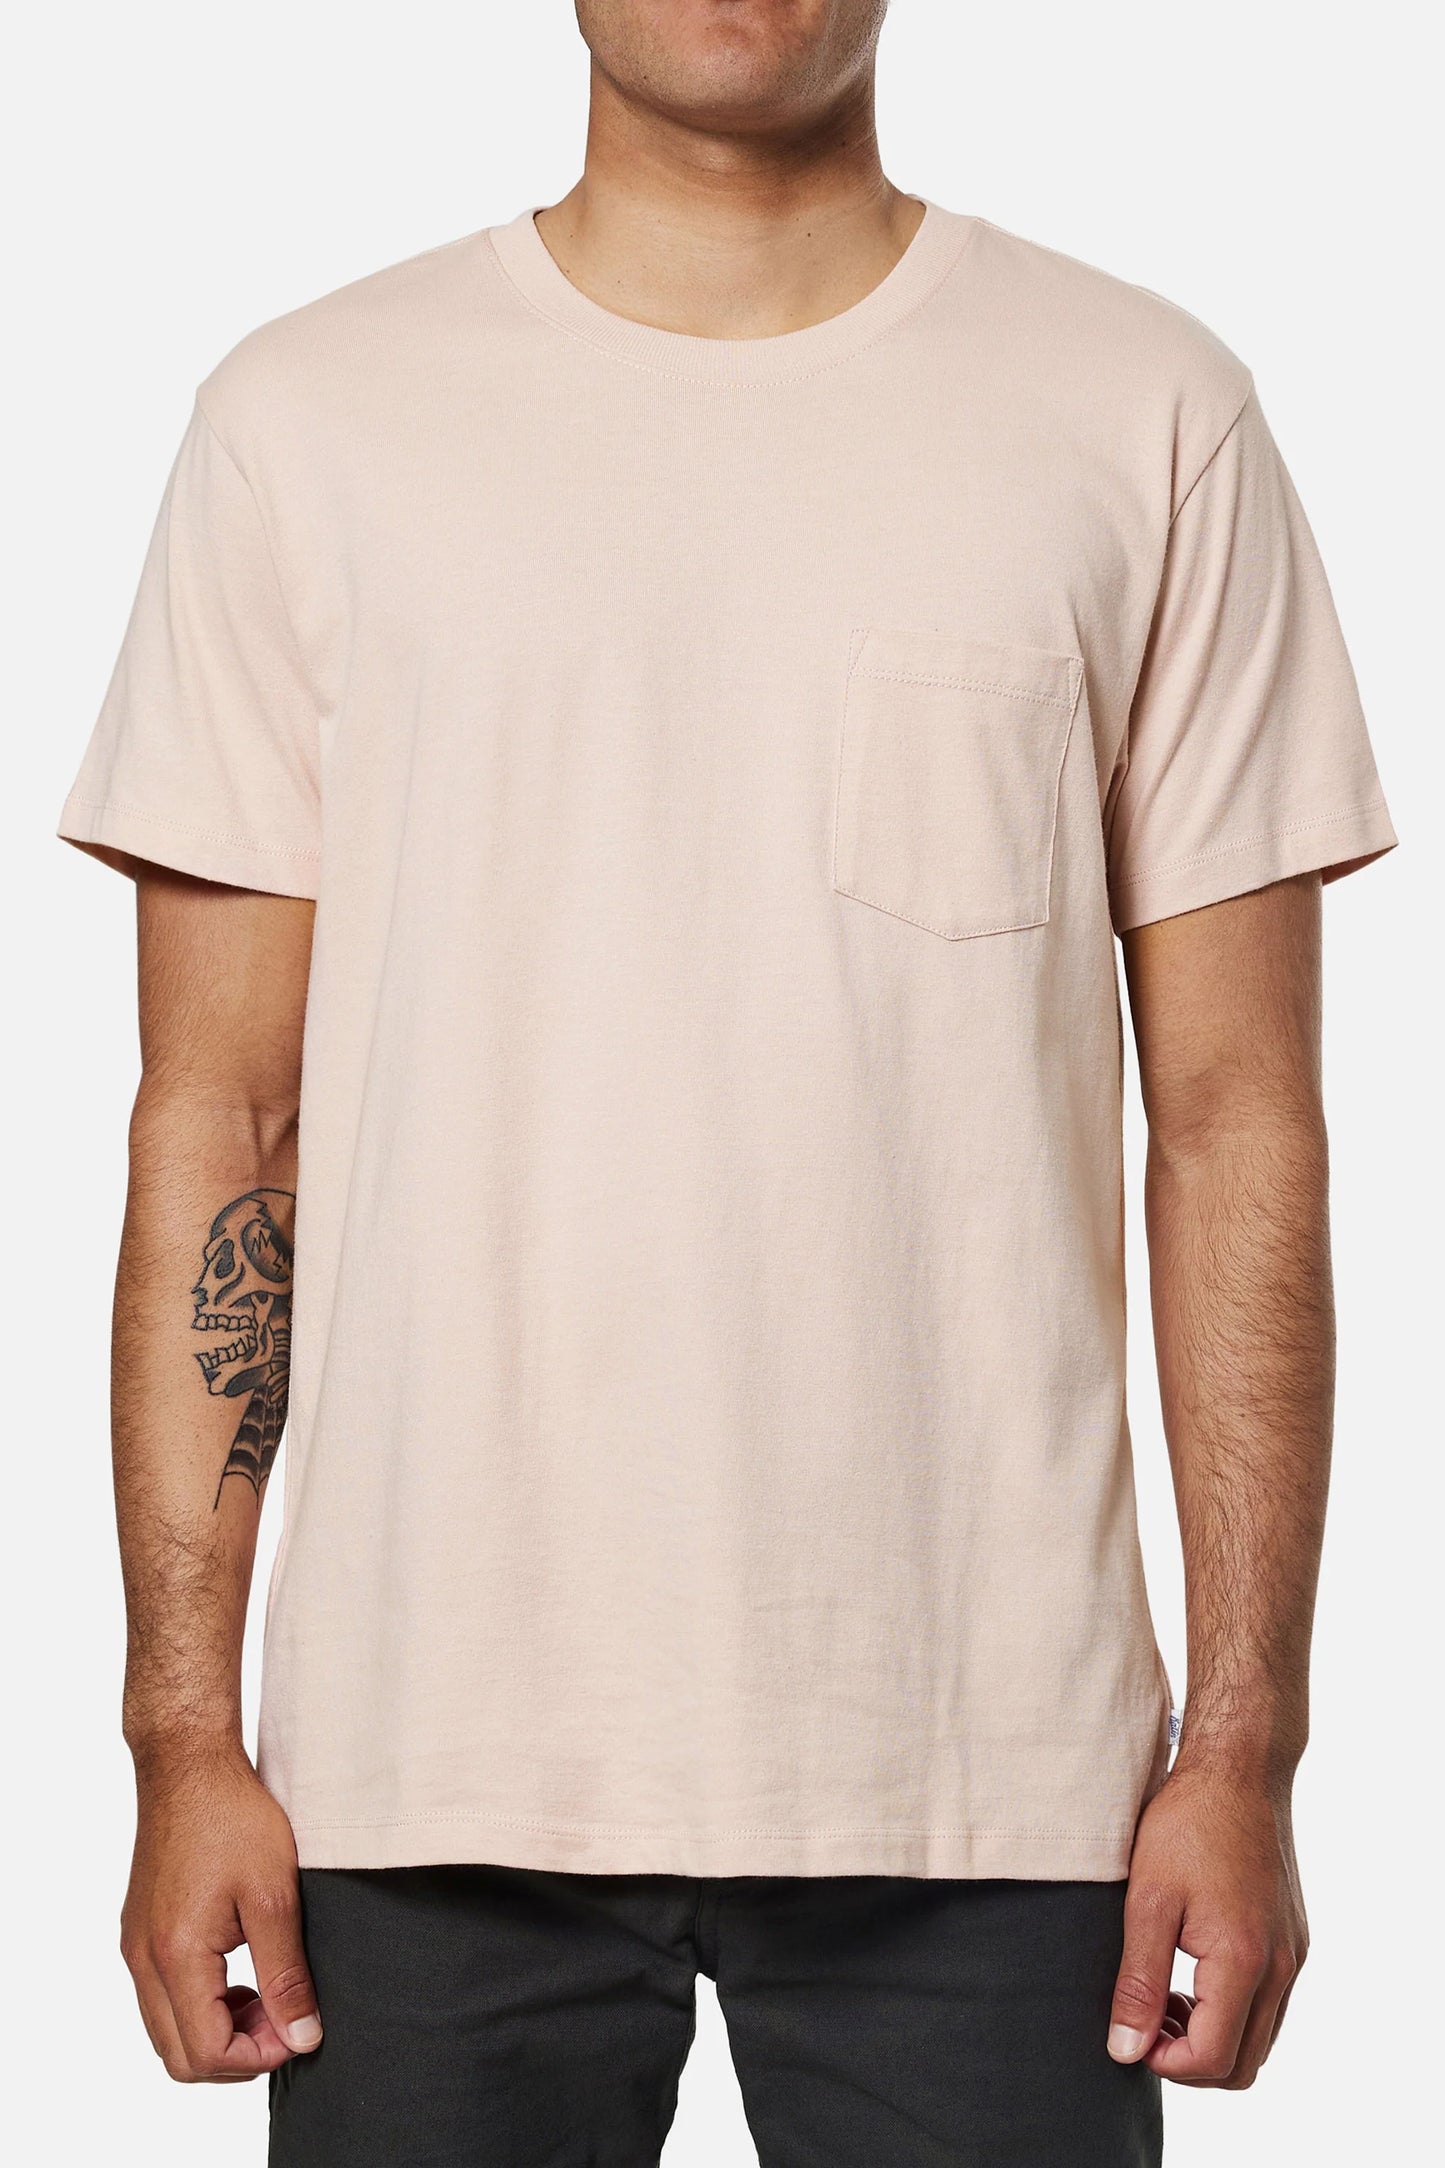 Front view of a man wearing a pink short sleeve pocket t-shirt by Katin